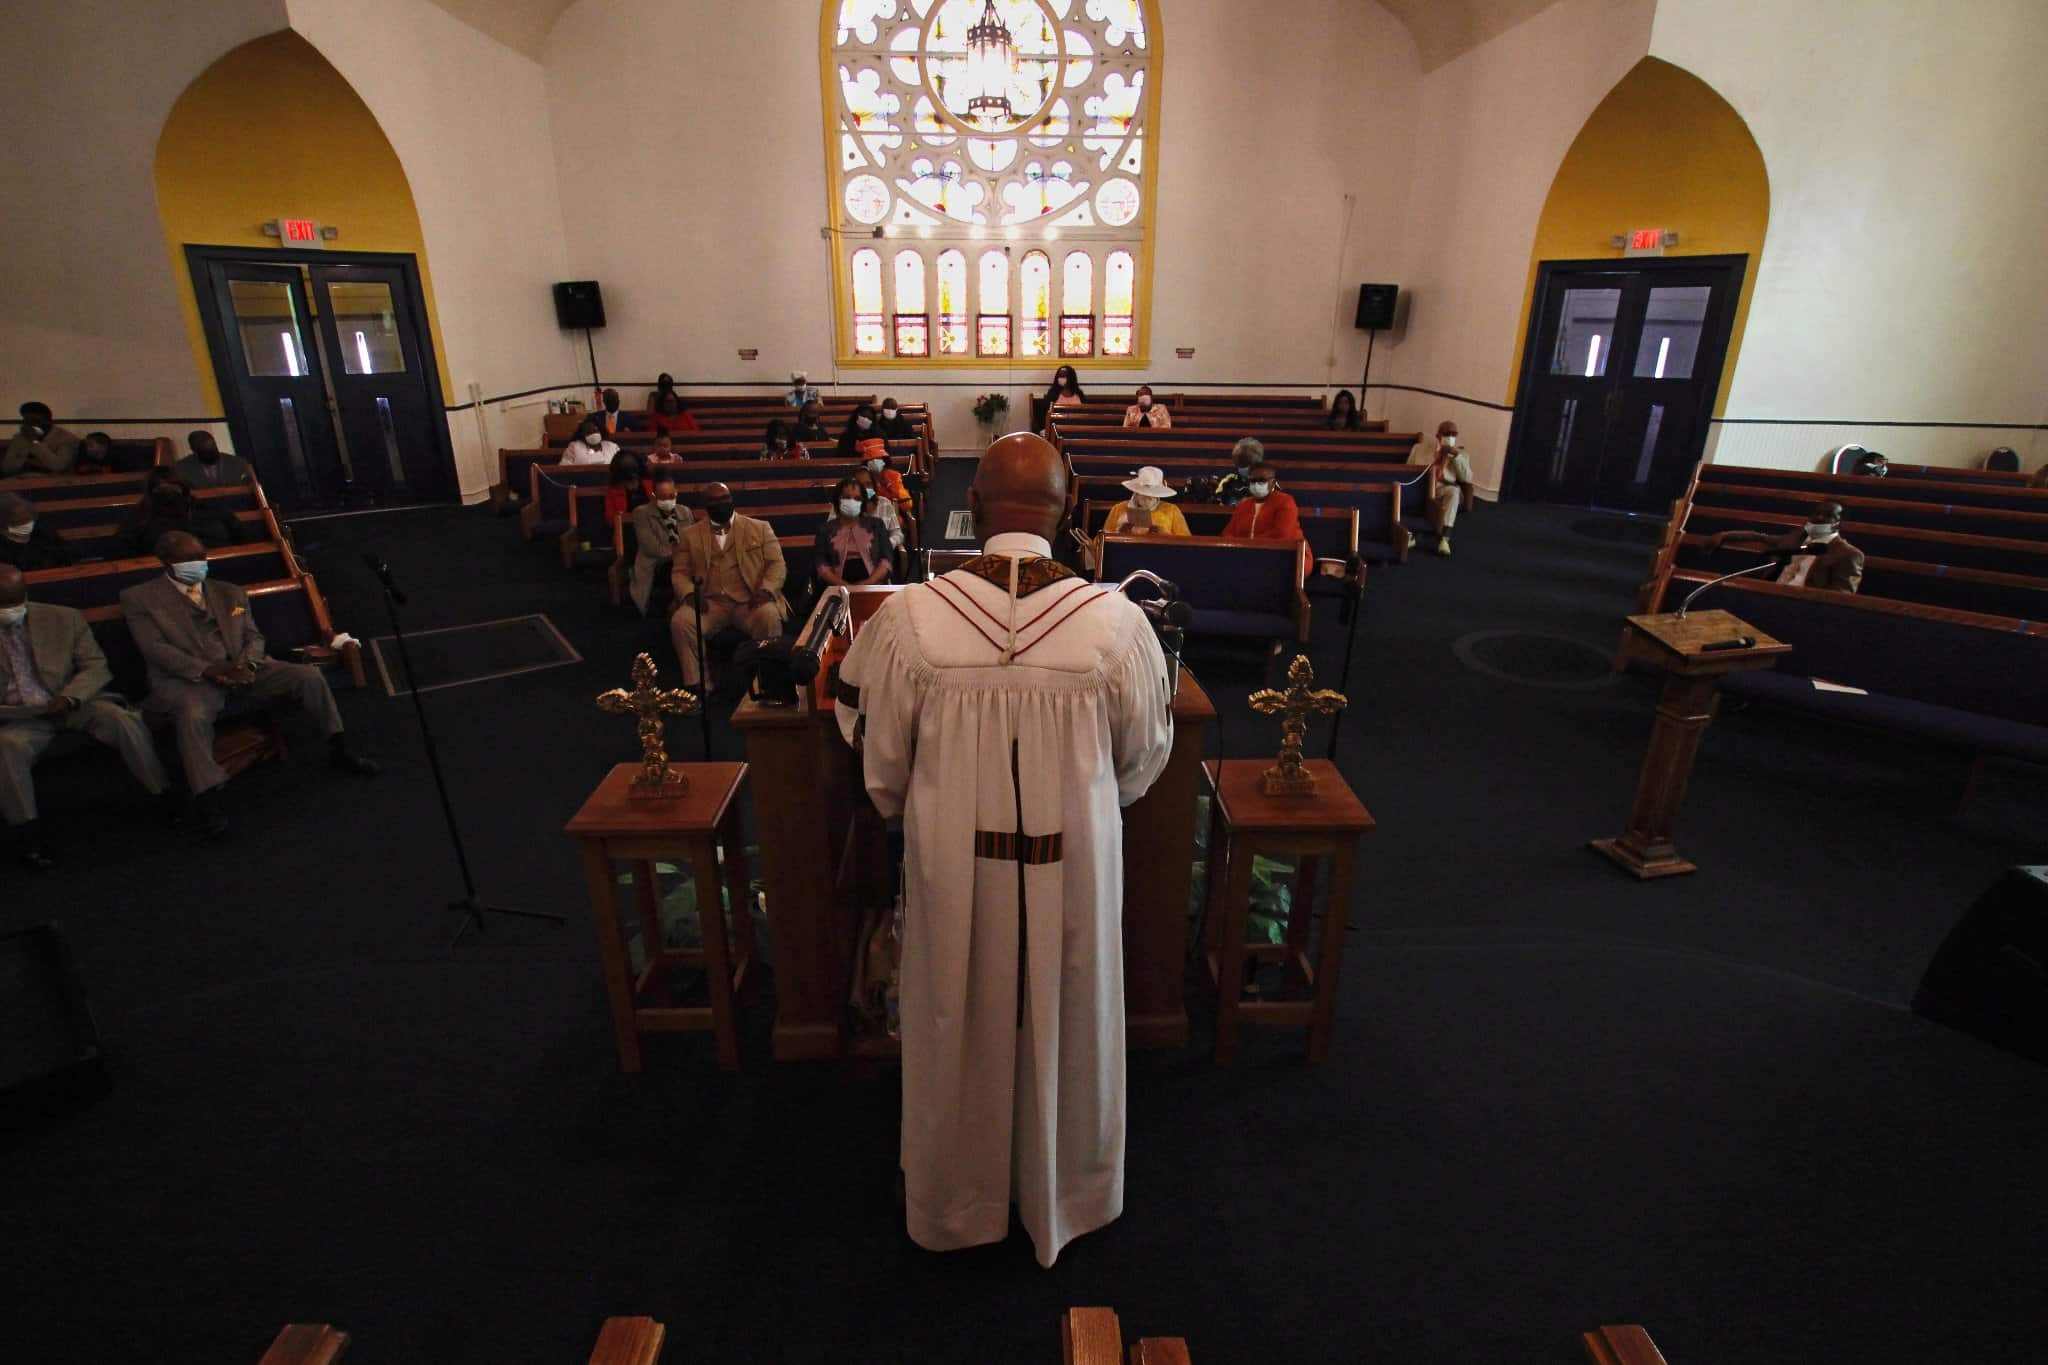 The Church Is A New Health-Care Alternative For The Black Population